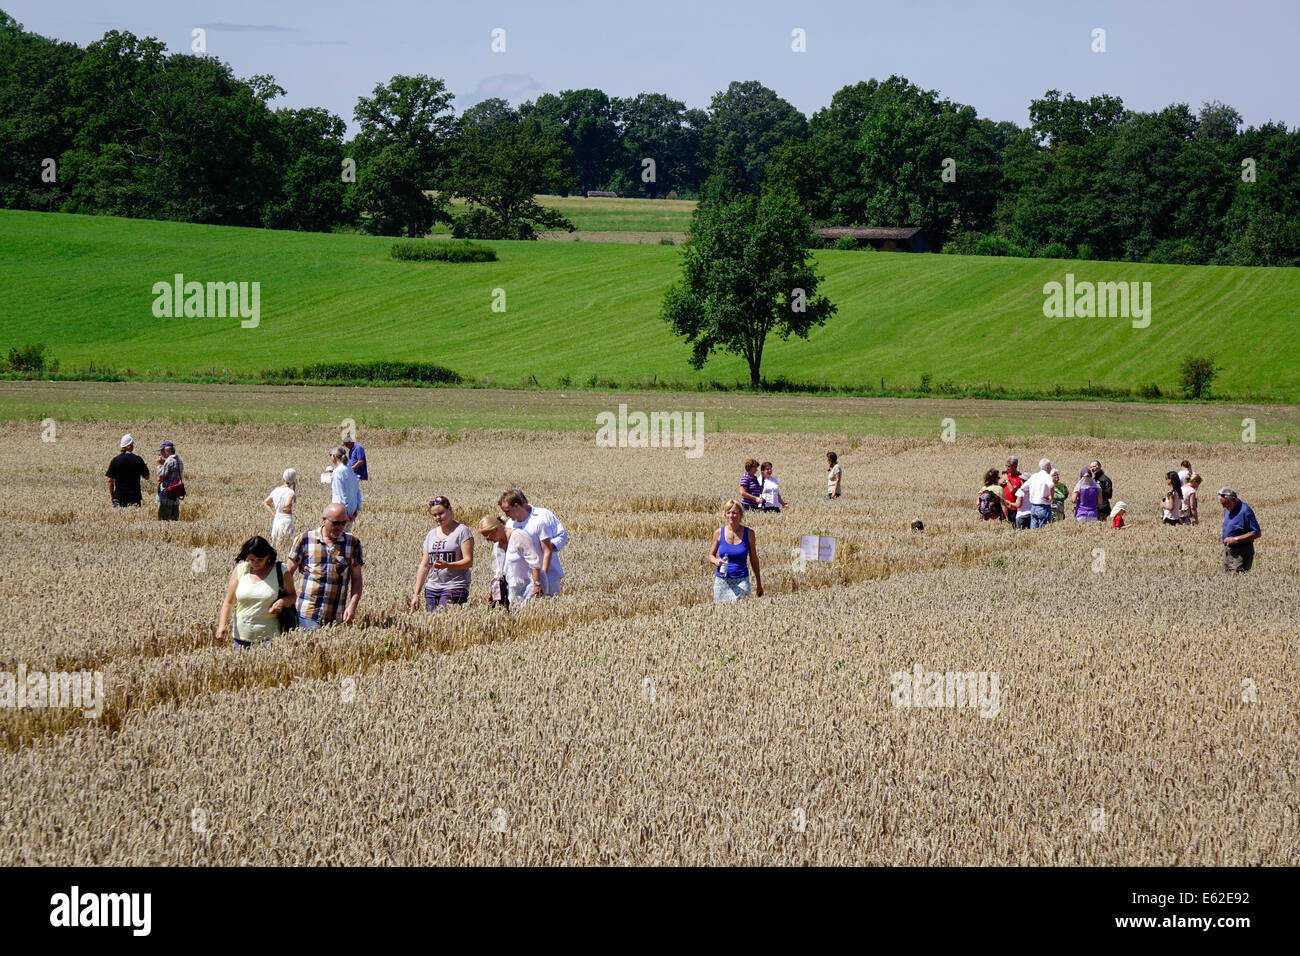 People admire a crop circle in a corn field at Rasiting, Upper Bavaria, Bavaria, Germany, Europe Stock Photo